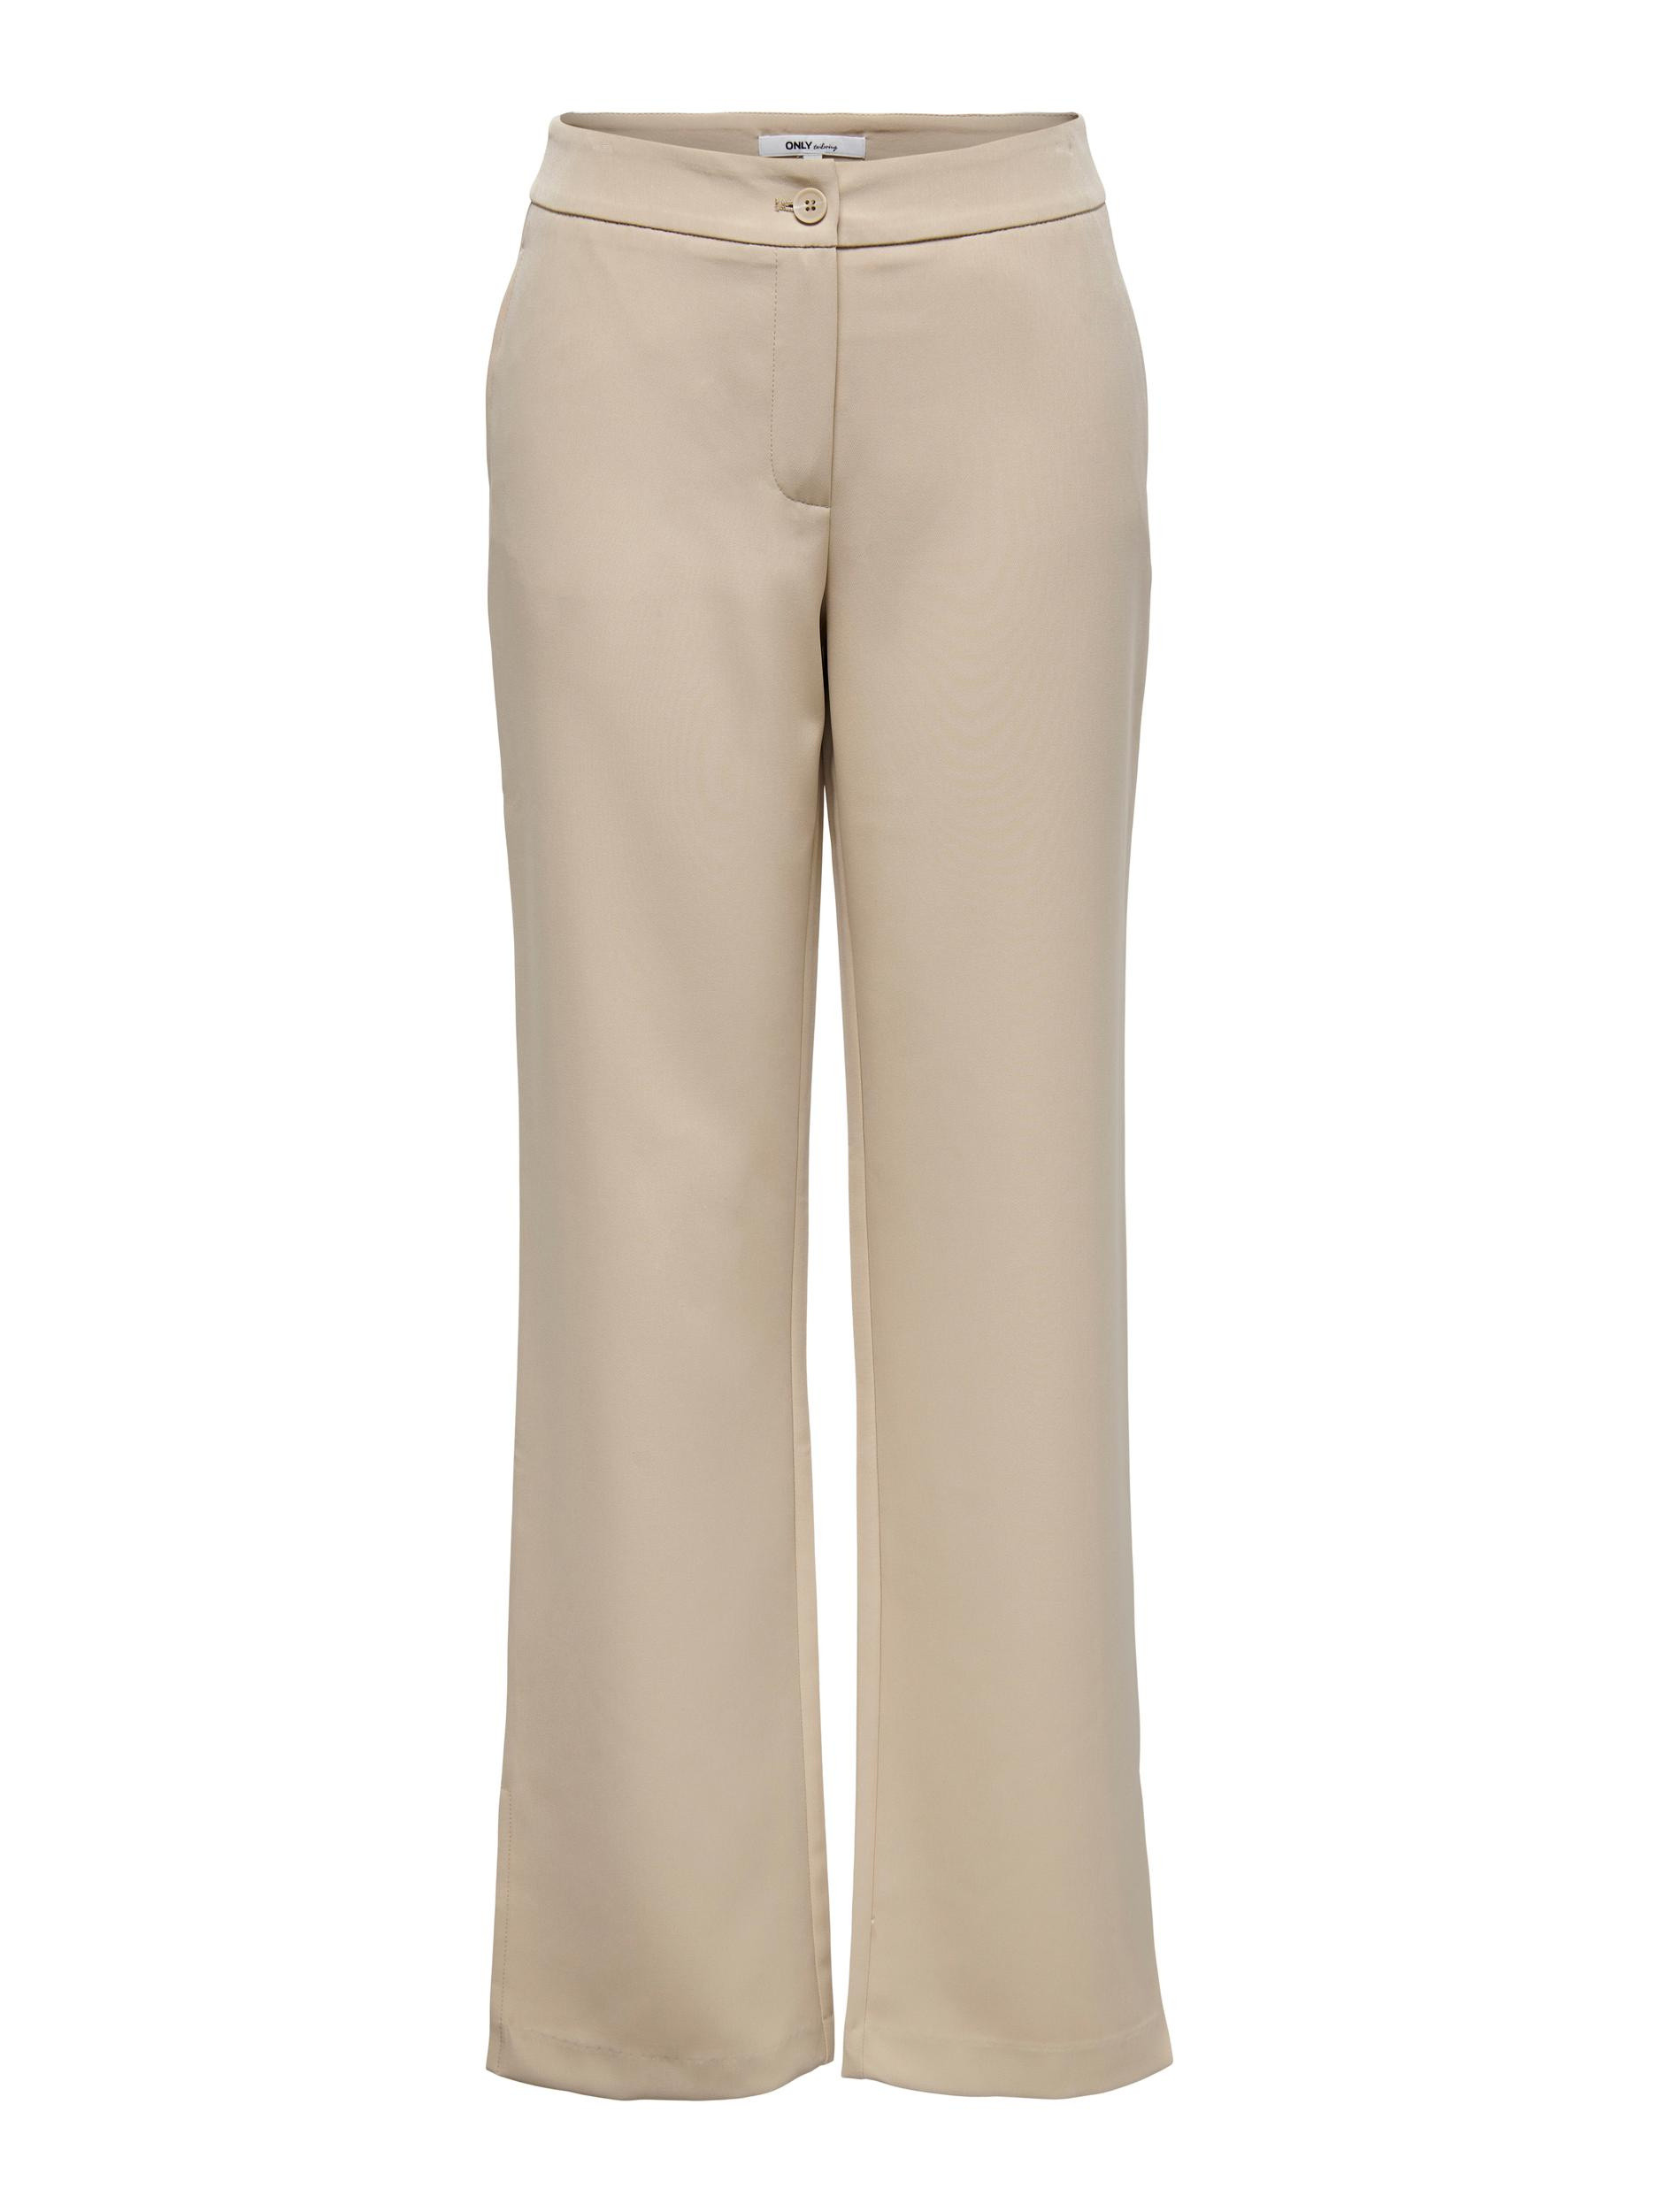 Only - Straight fit trousers, Light Beige, large image number 0